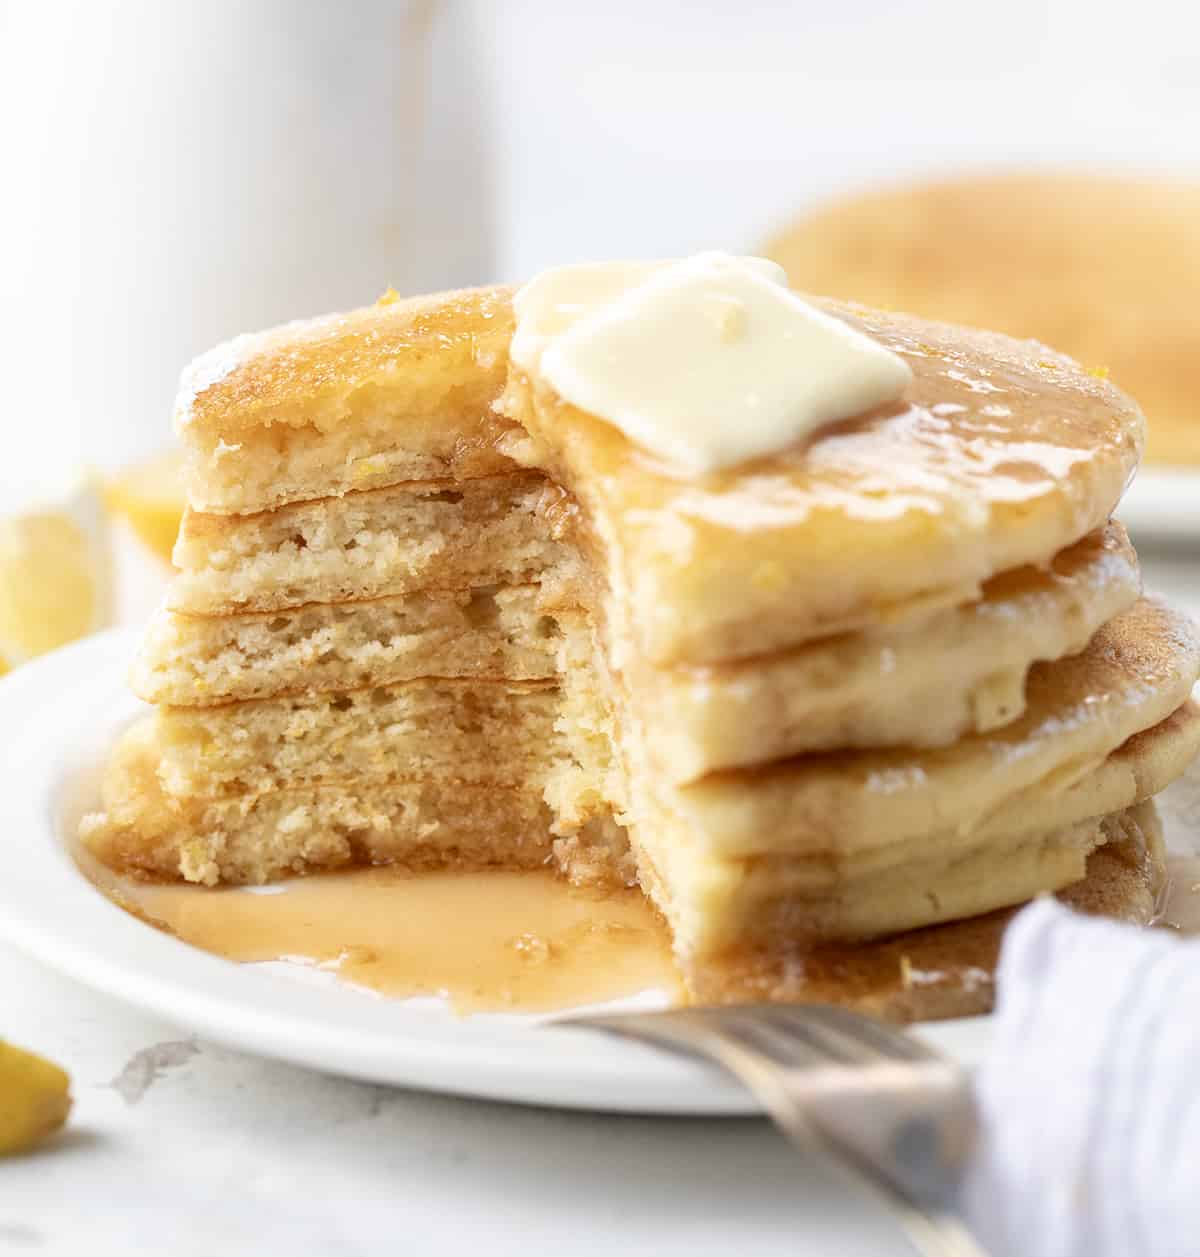 Stack of Lemon Ricotta Pancakes cut into showing inside texture.